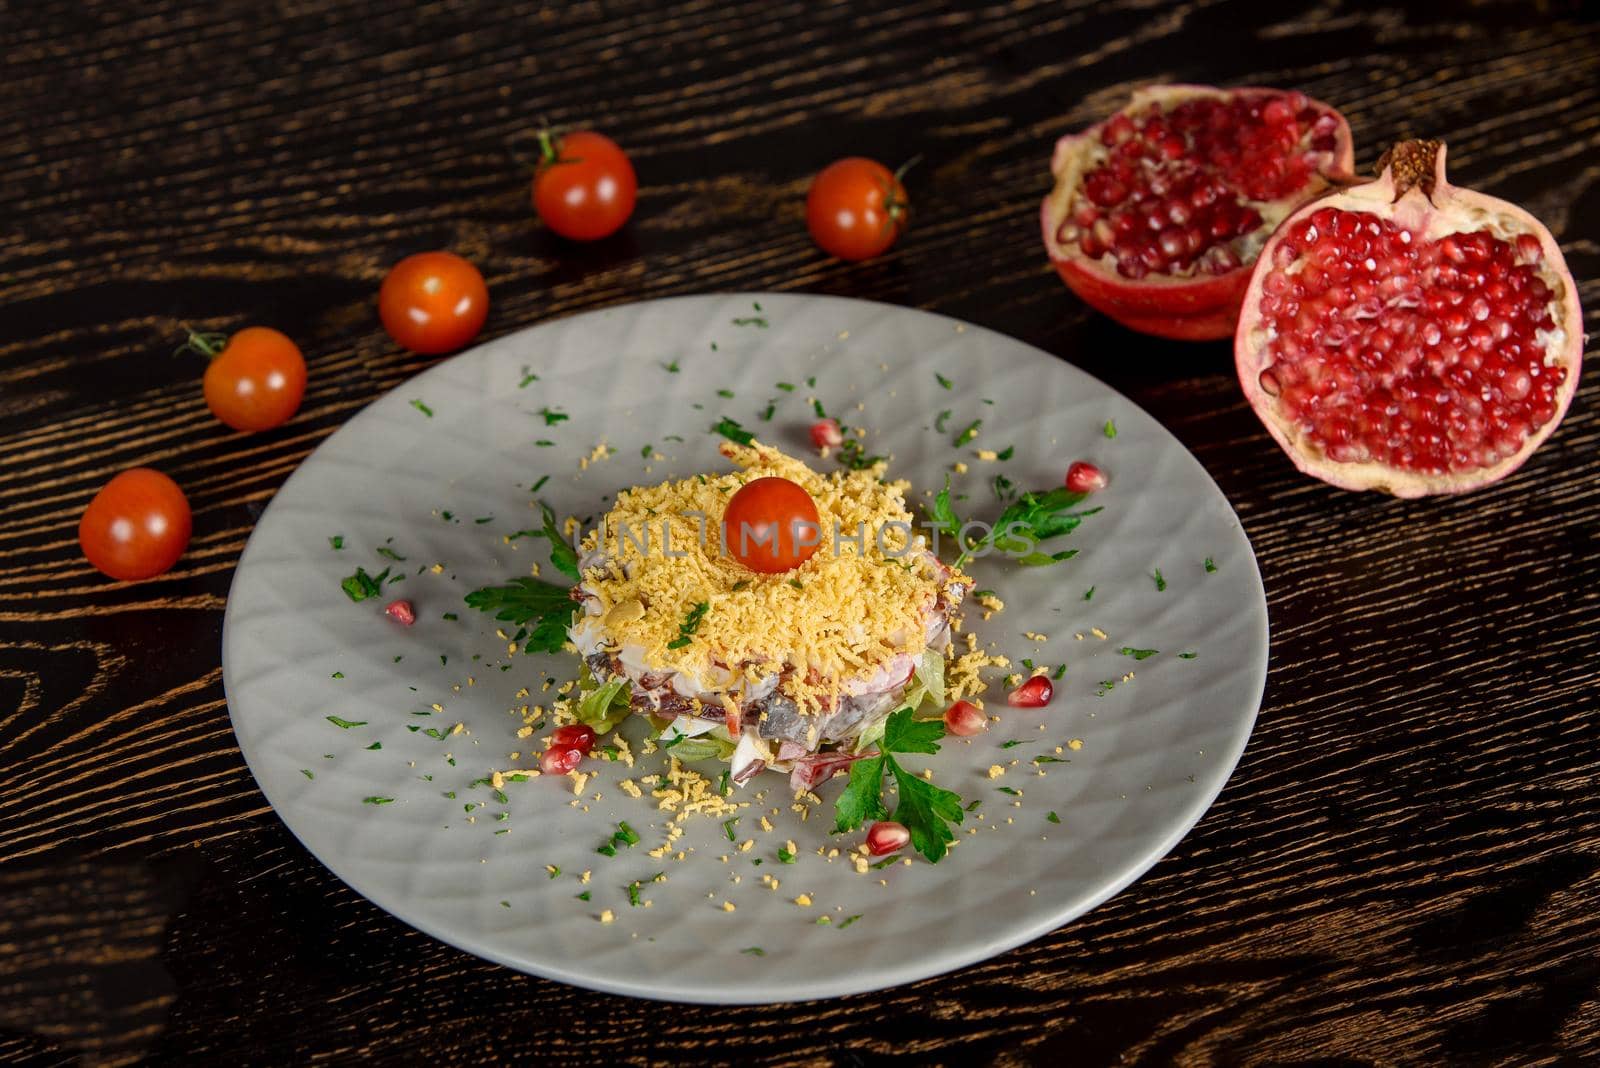 Puff salad with meat, vegetables, cheese, eggs, garnished with herbs and pomegranate and cherry tomatoes on a gray plate. Against the background of halves of pomegranate and cherry tomatoes